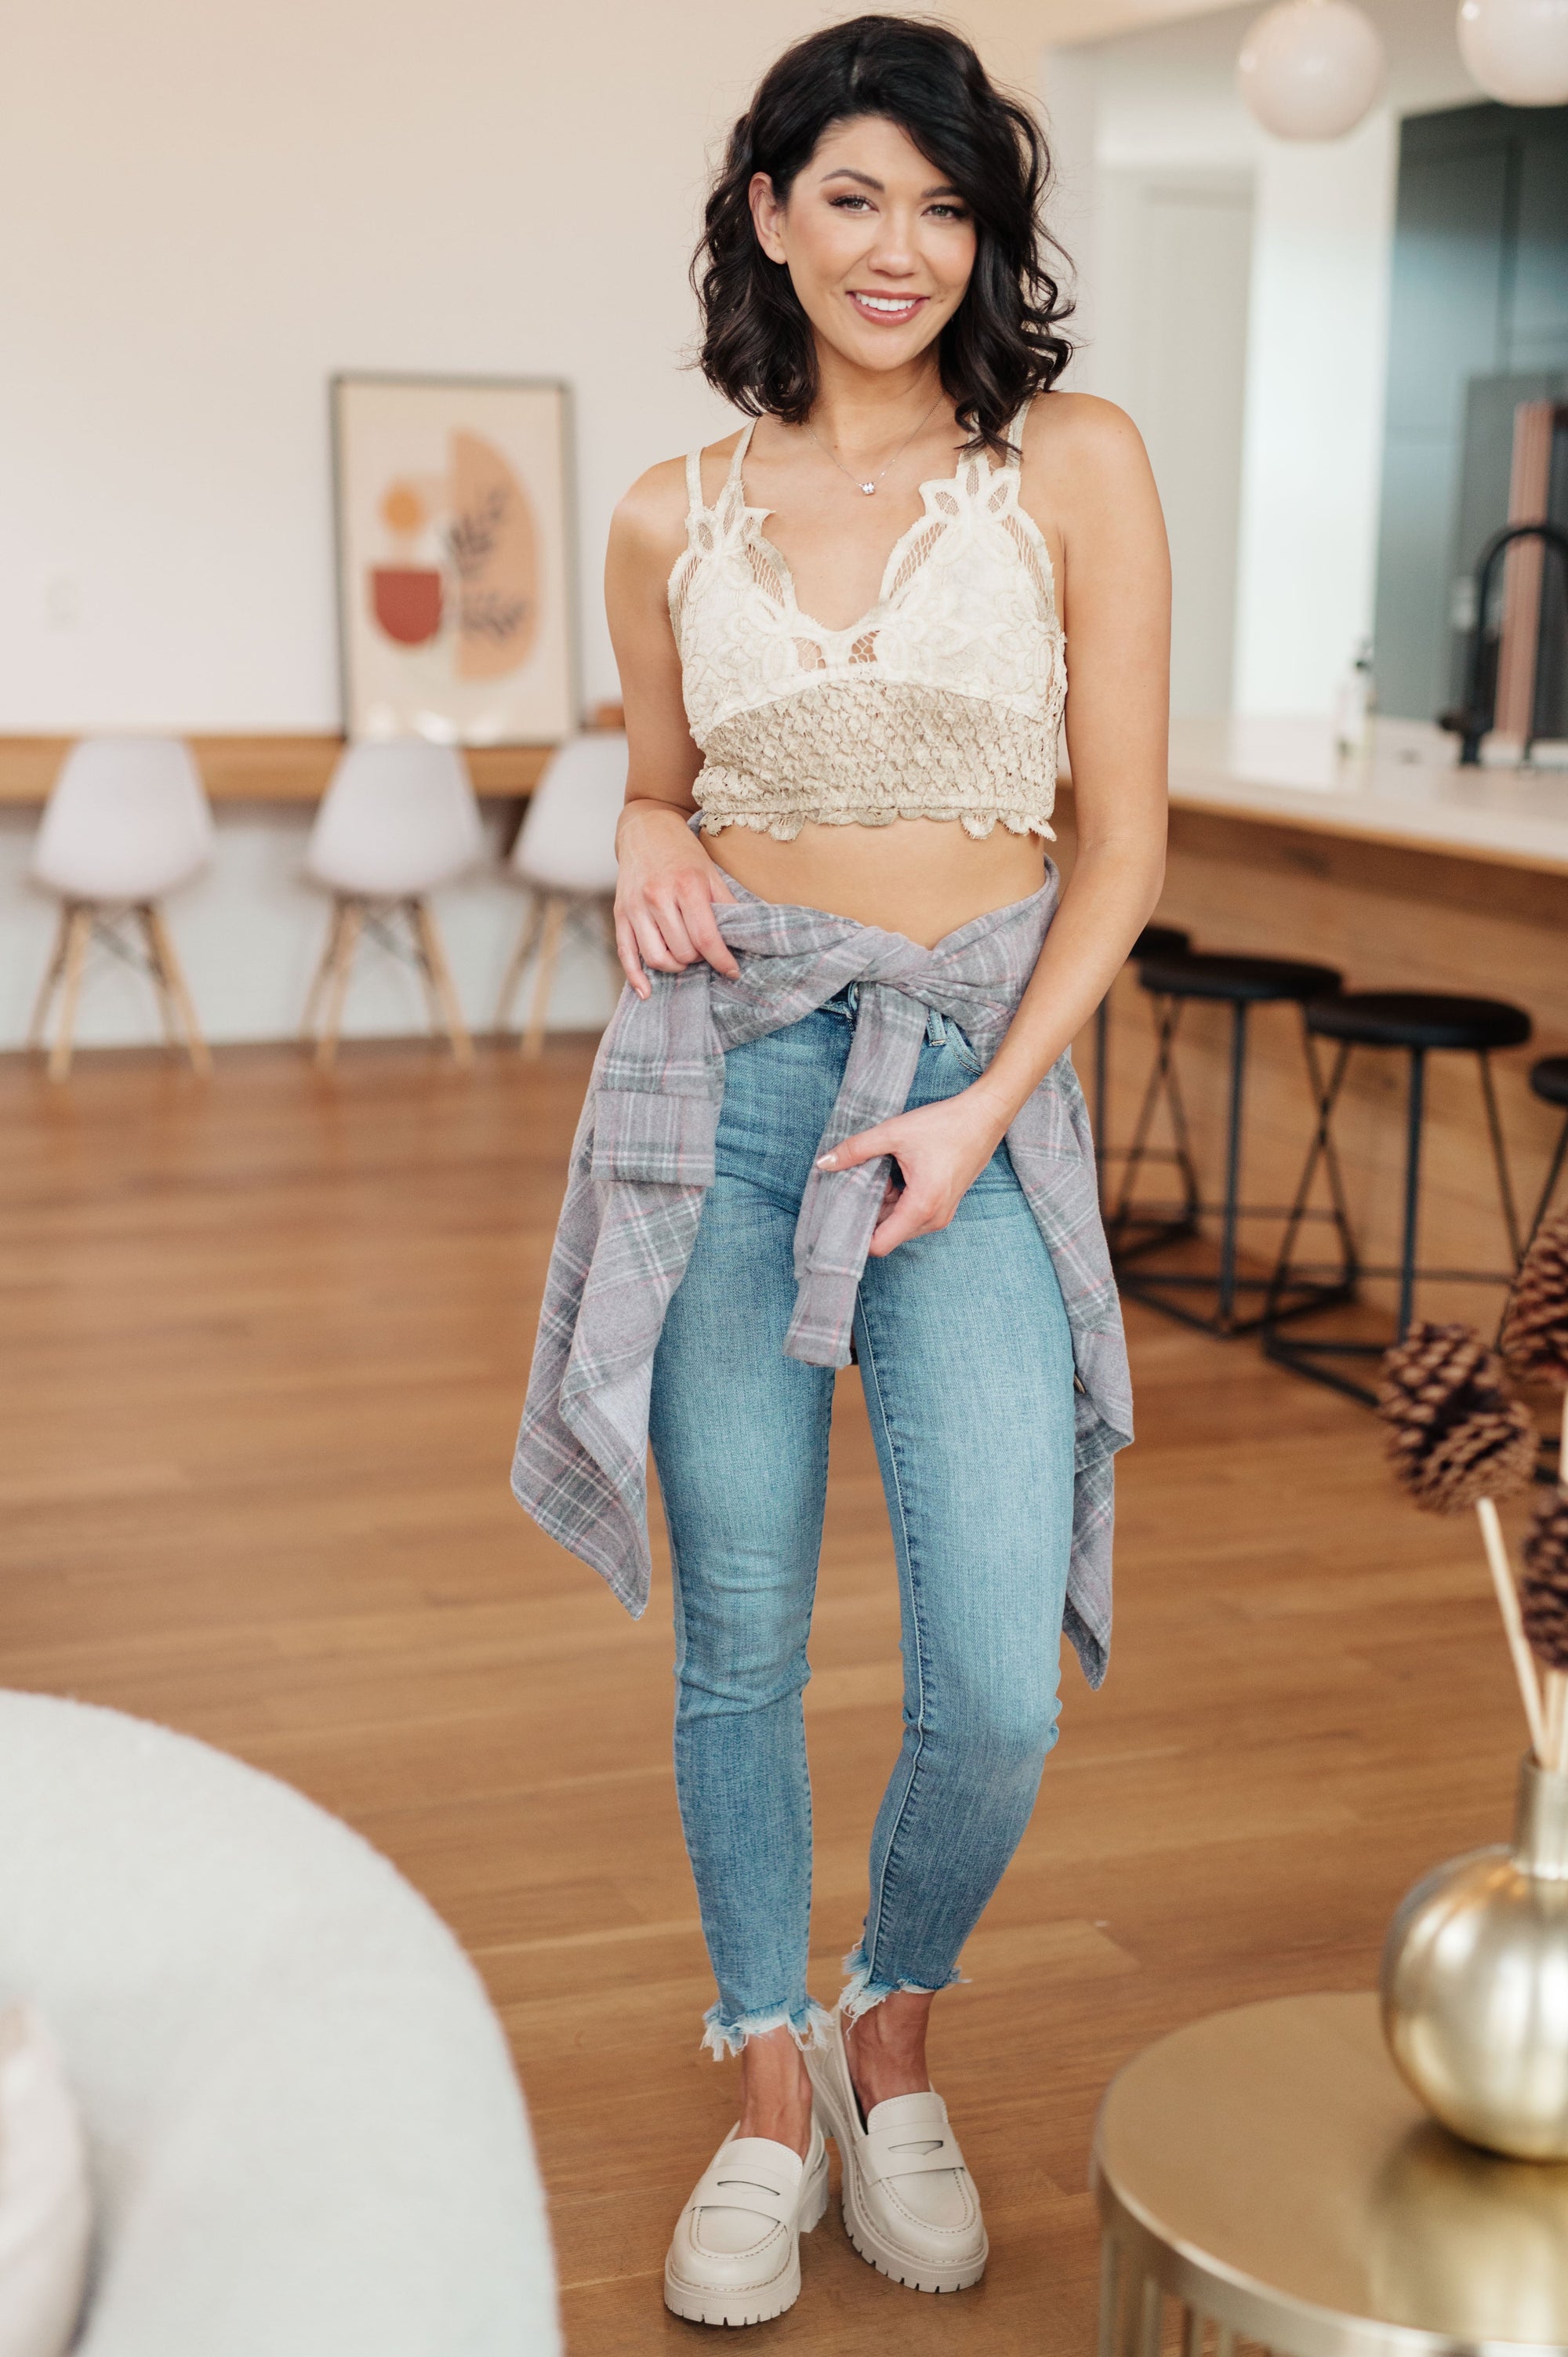 Live In Lace Bralette in Taupe - Bella Jade